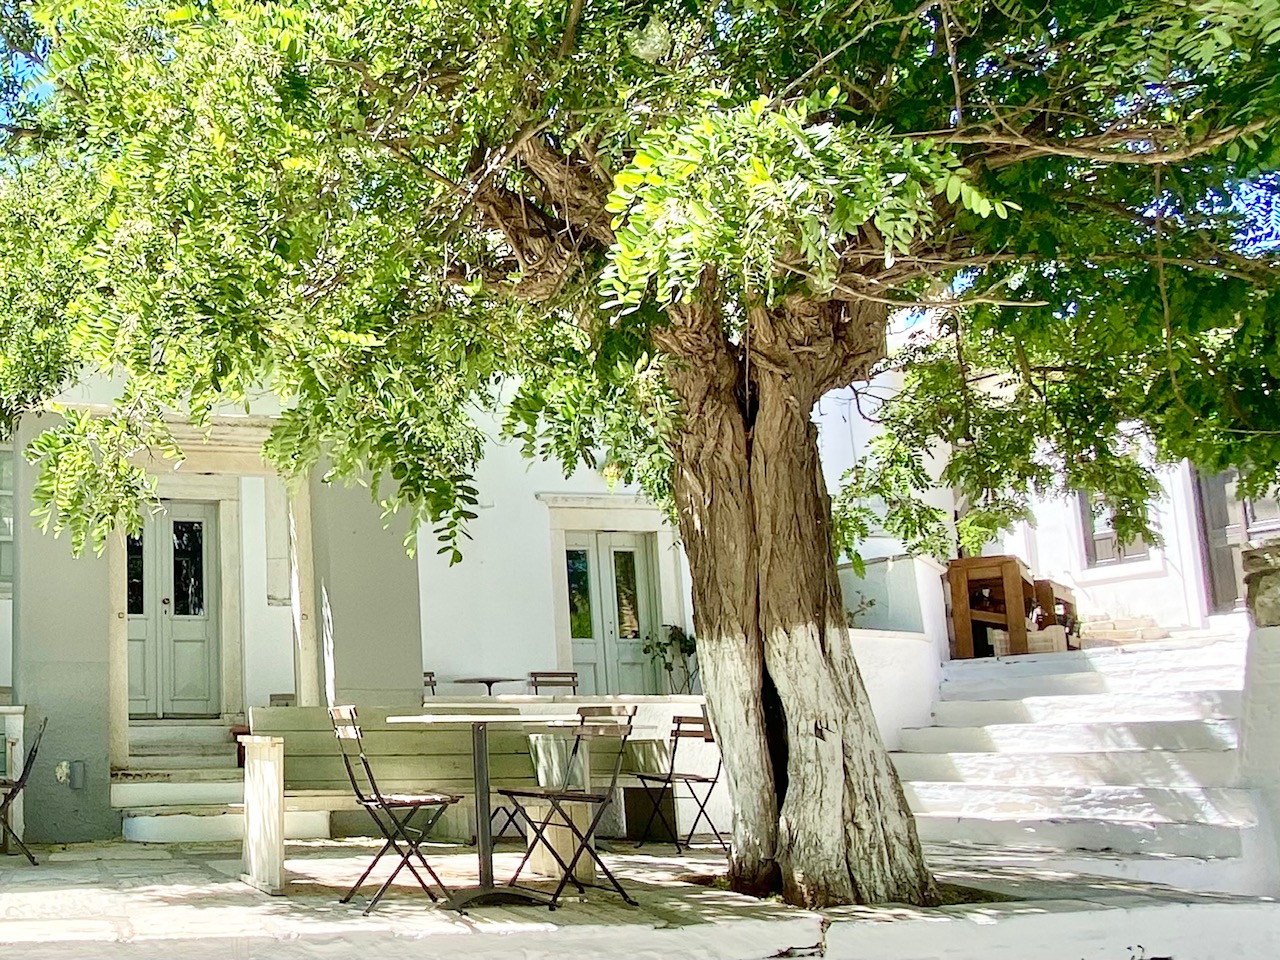 Cafe tables and chairs under a tree beside whitewashed steps